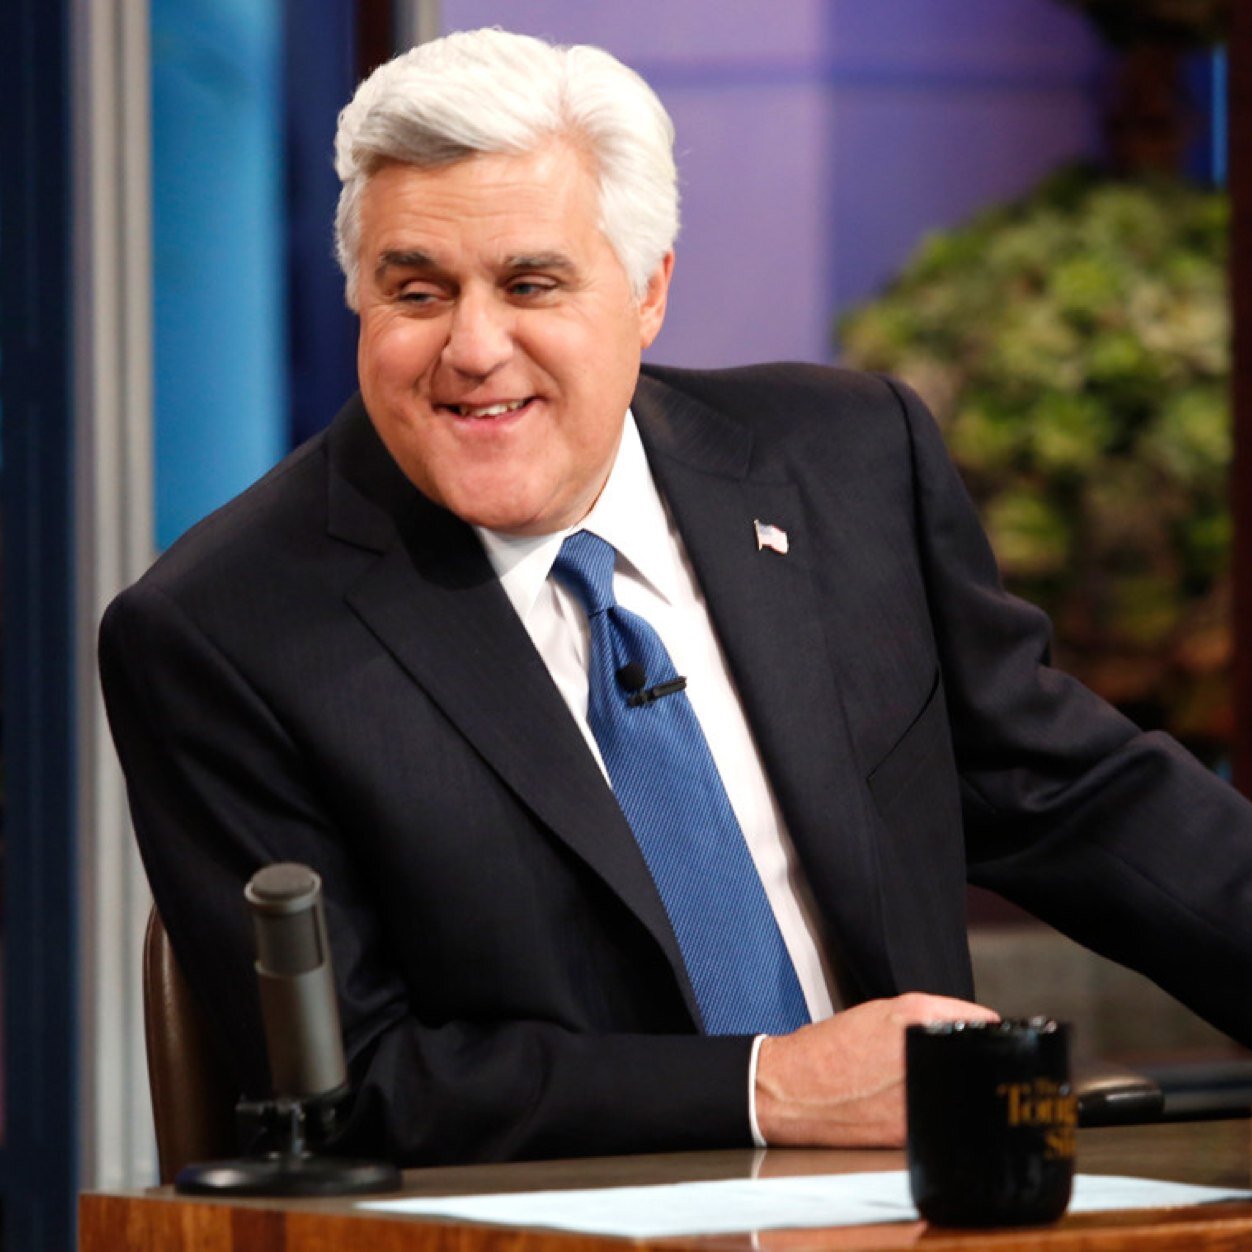 My names Jay Leno, have you guys heard about this? By the way sat hello to Ricky Minor and the Tonight show Band!*Not Jay Leno*